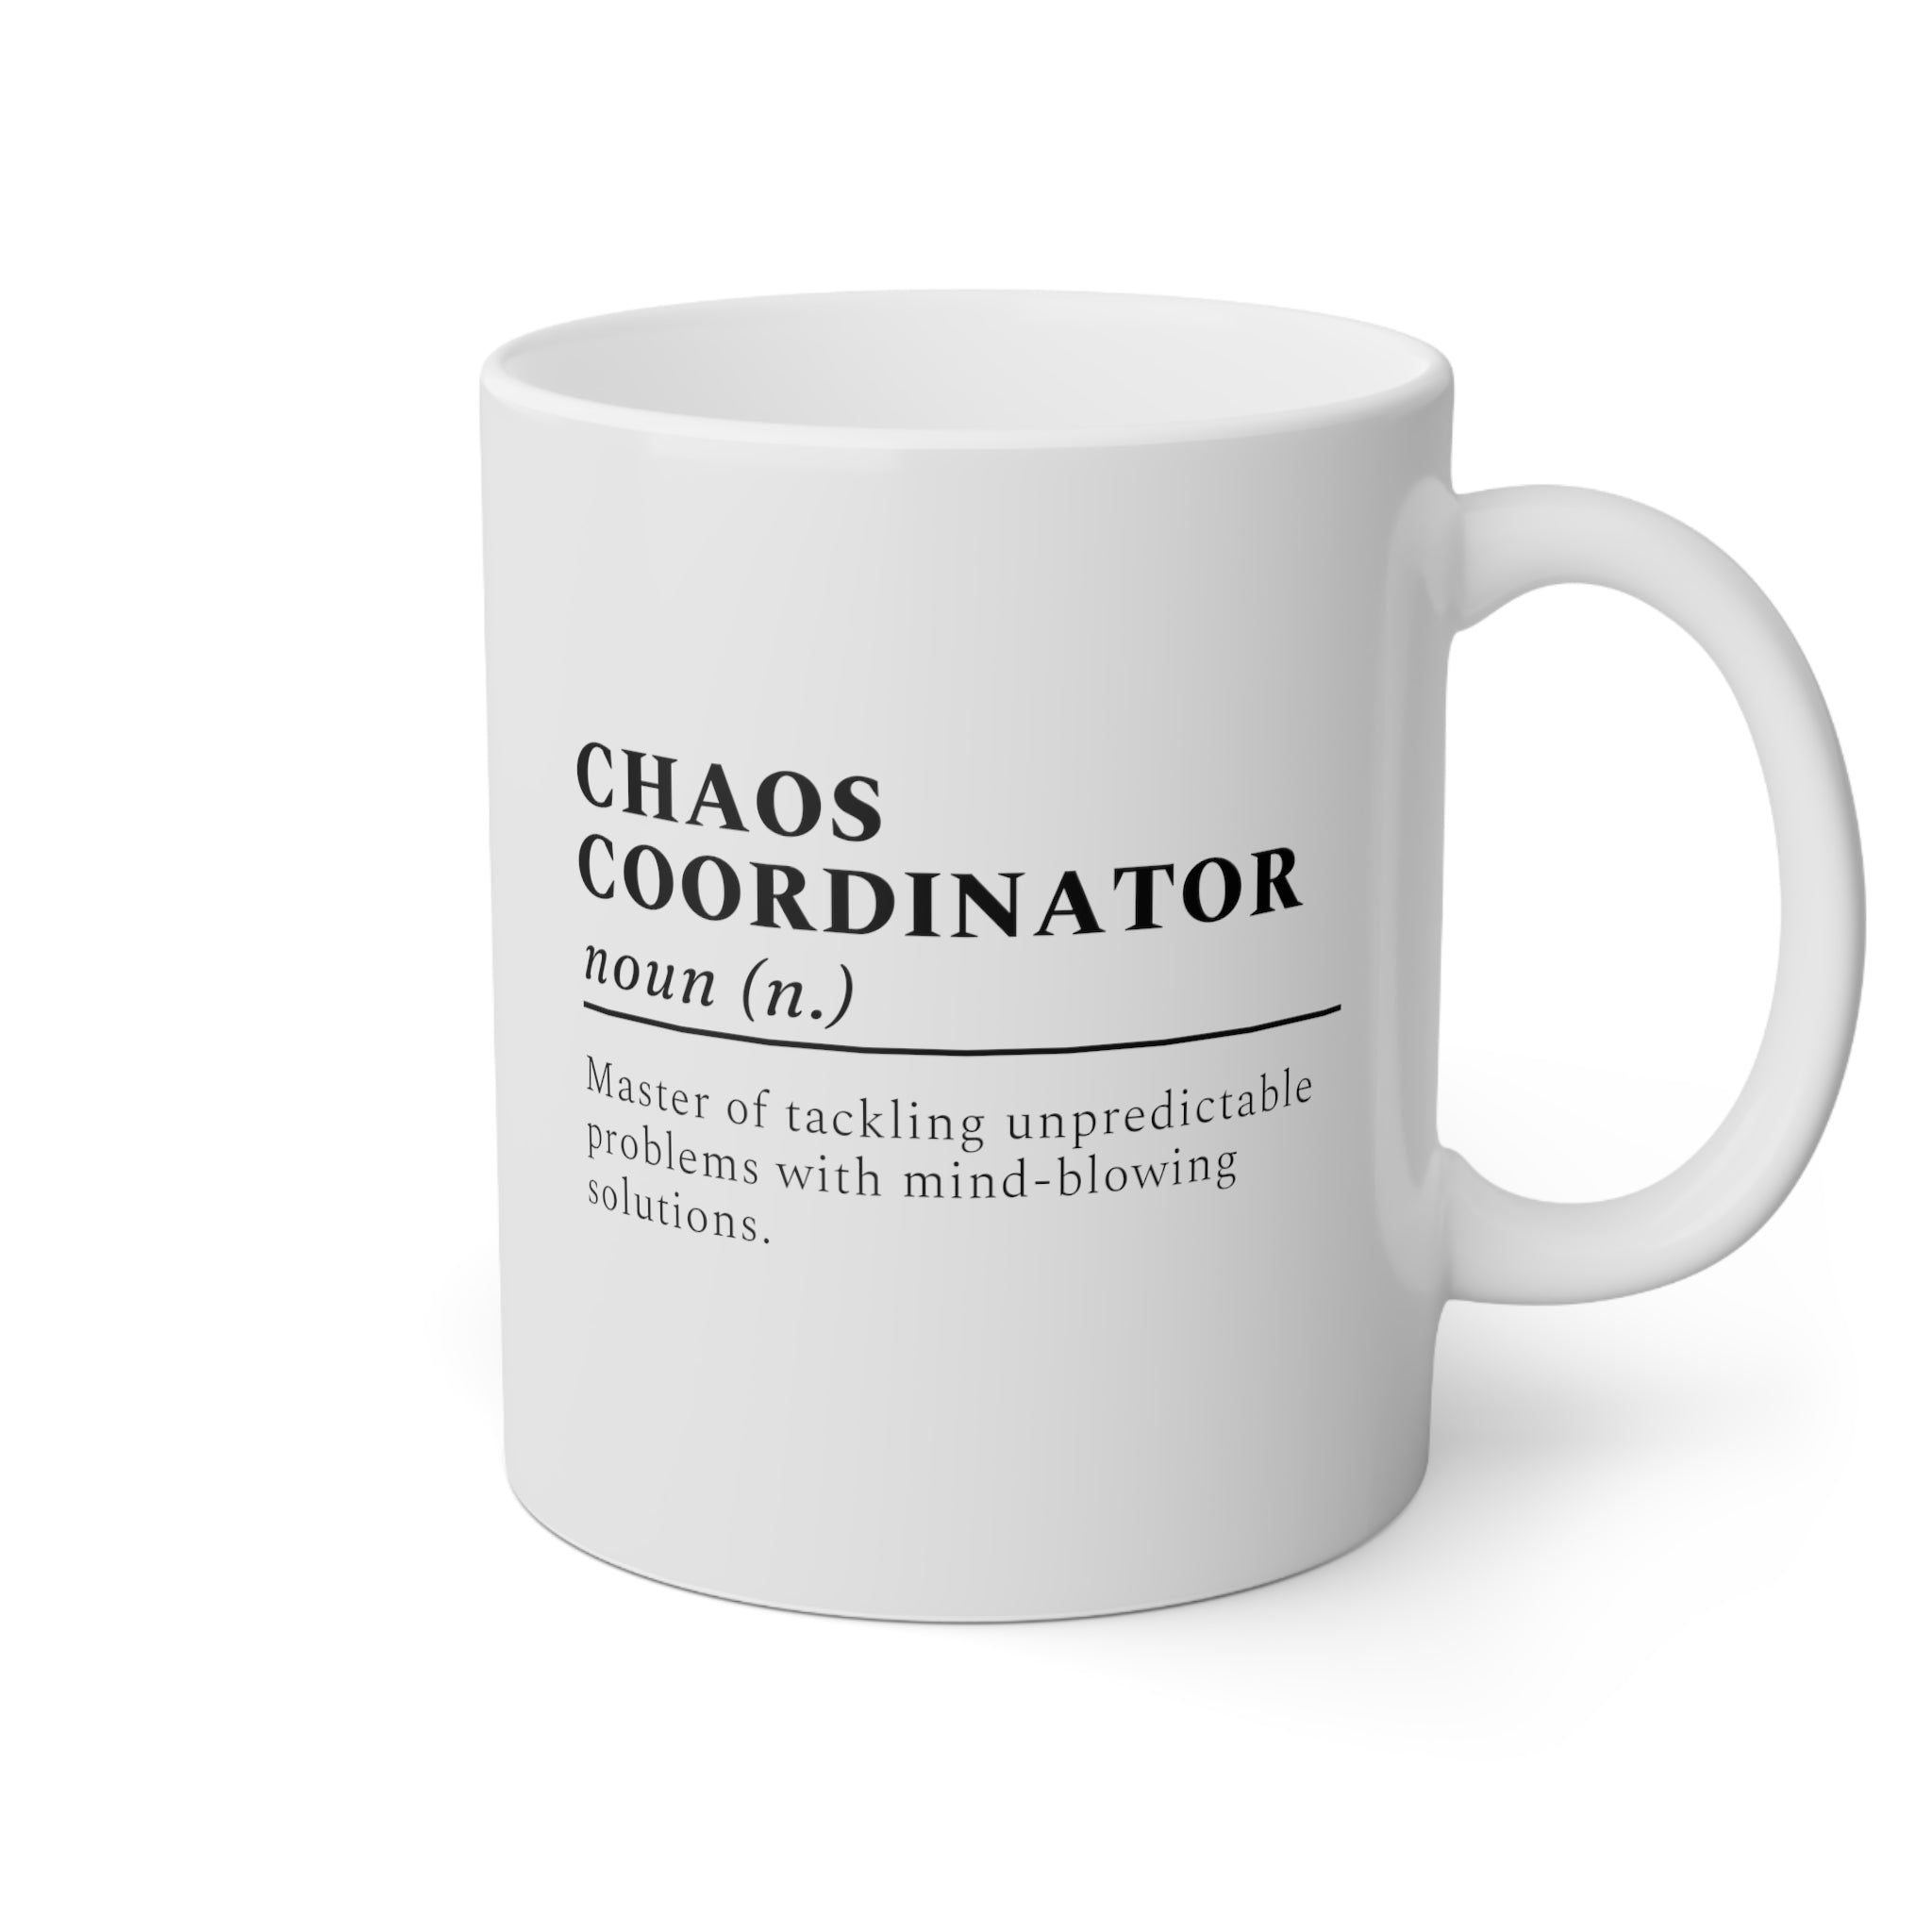 56 Best Gifts for Coworkers in 2023